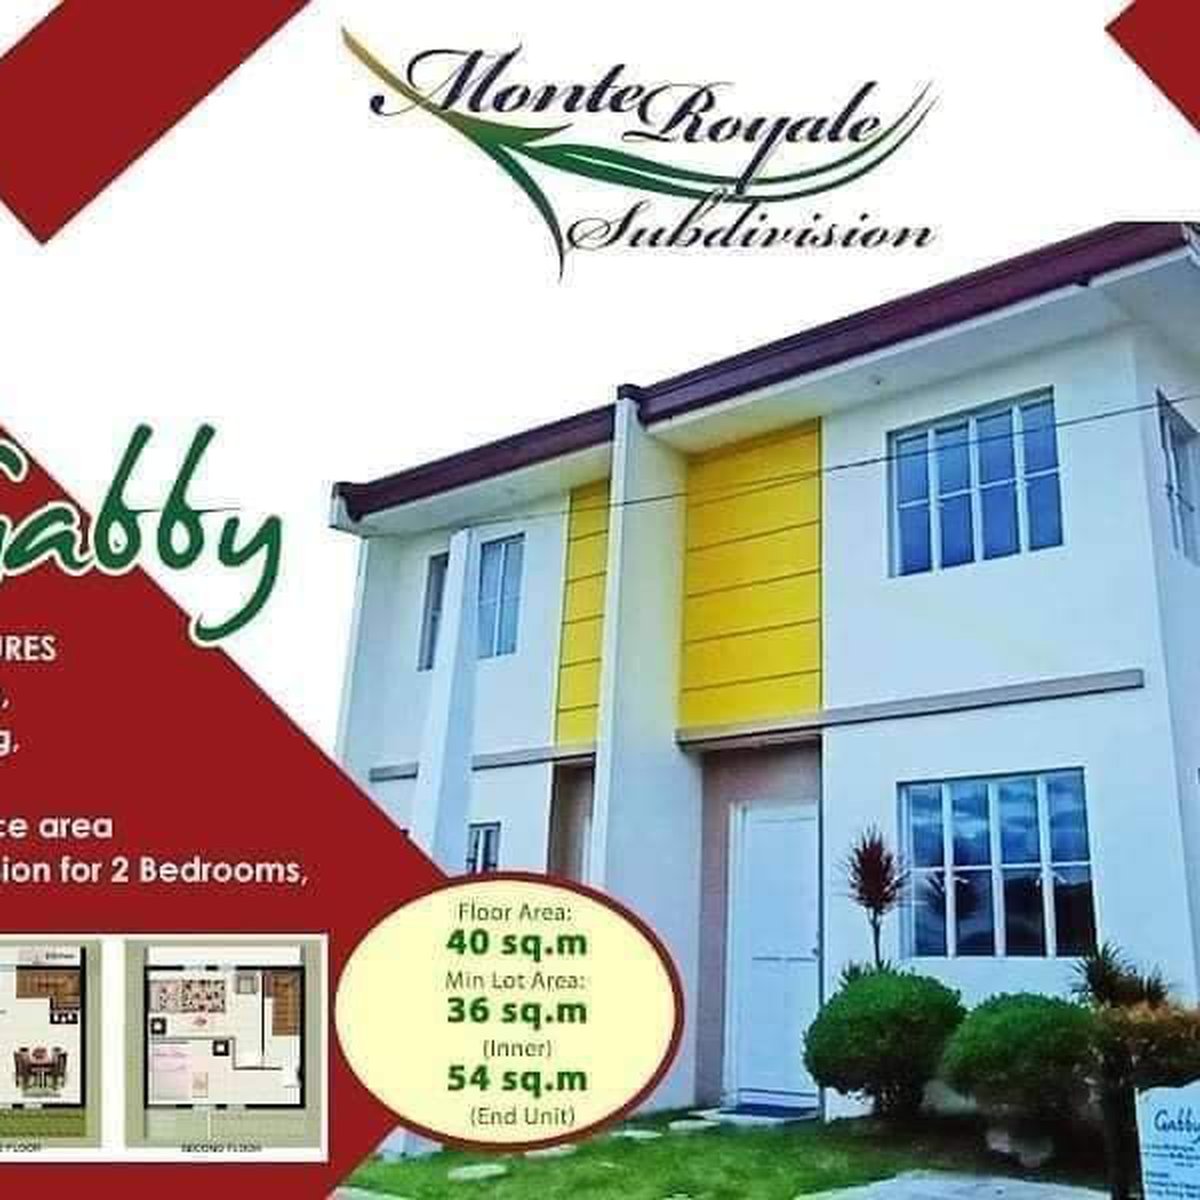 2 bedroom Townhouse for Sale in Imus Cavite